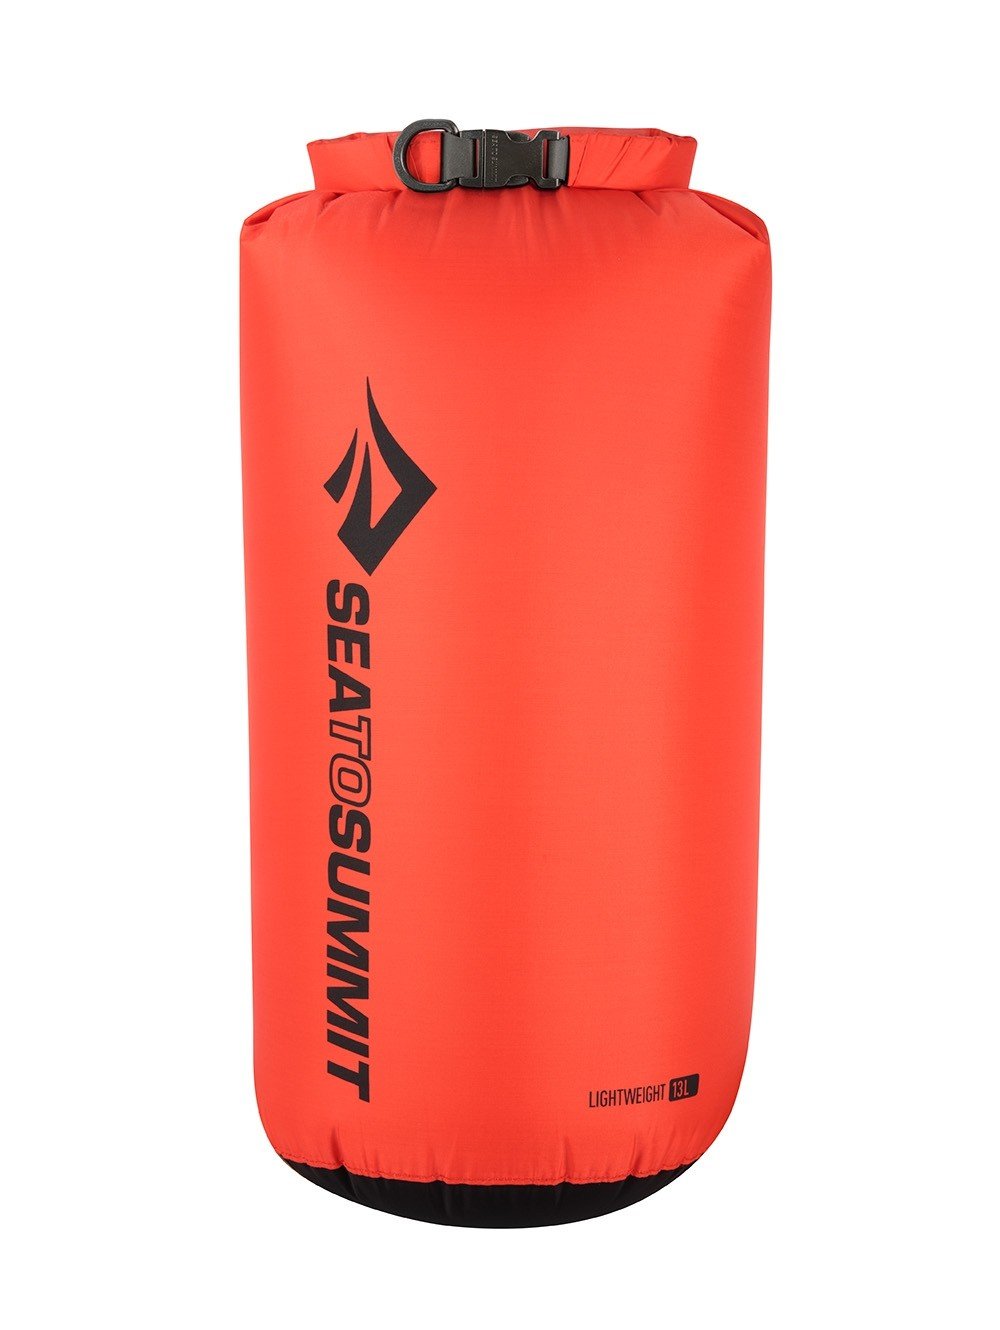 Sea To Summit Lightweight 70D 13 Litres Dry Sack Bags, Packs and Cases Sea To Summit Red Tactical Gear Supplier Tactical Distributors Australia